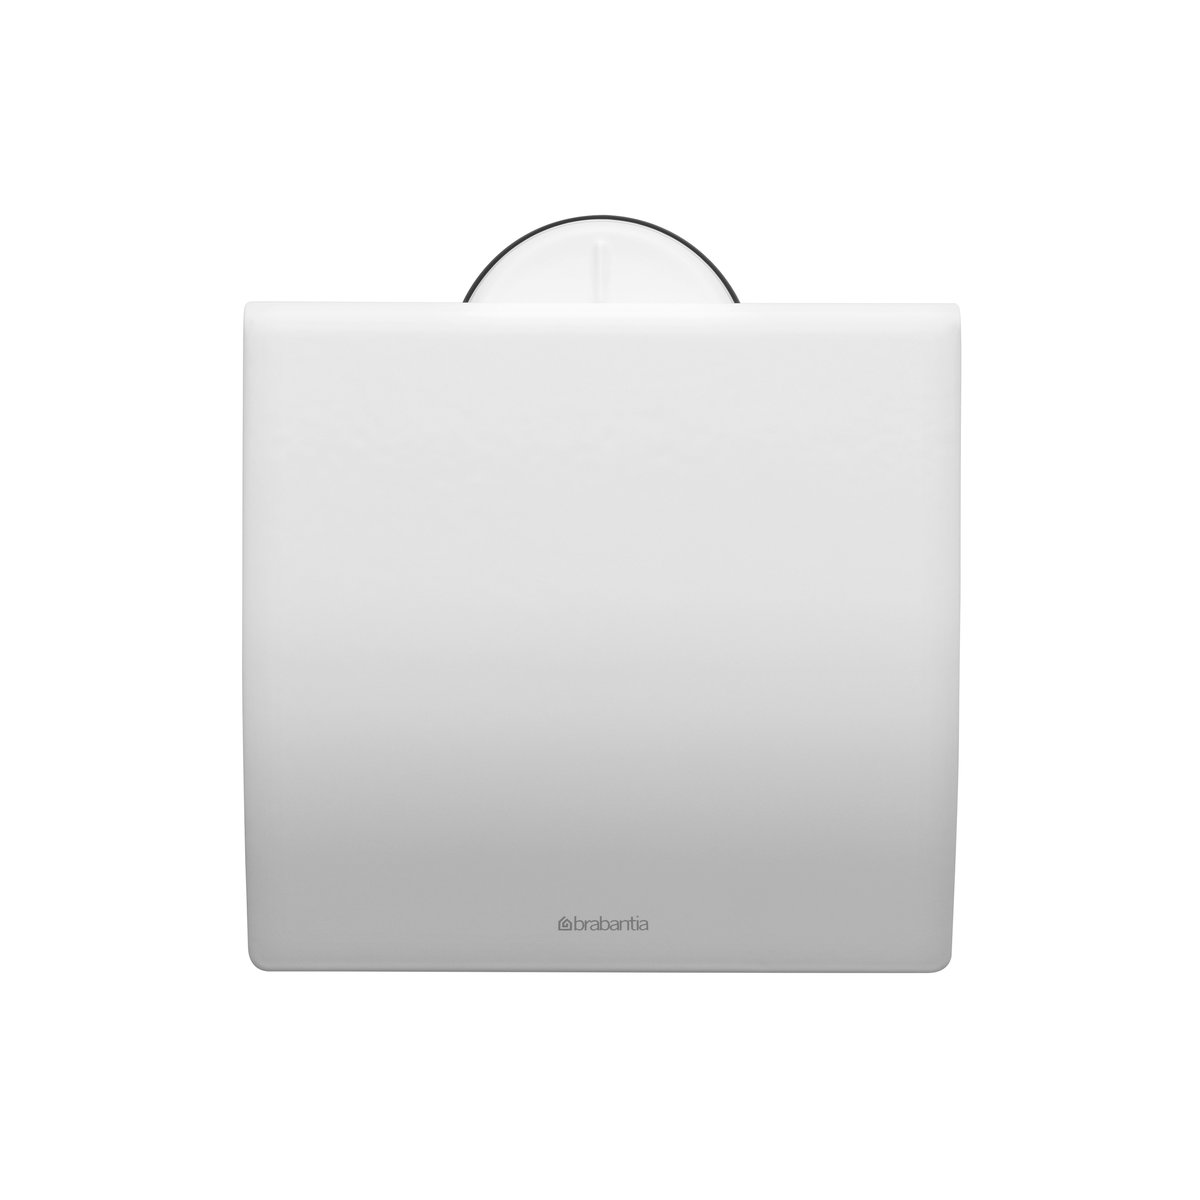 Brabantia Profile toalettpappershållare pure white (offwhite)